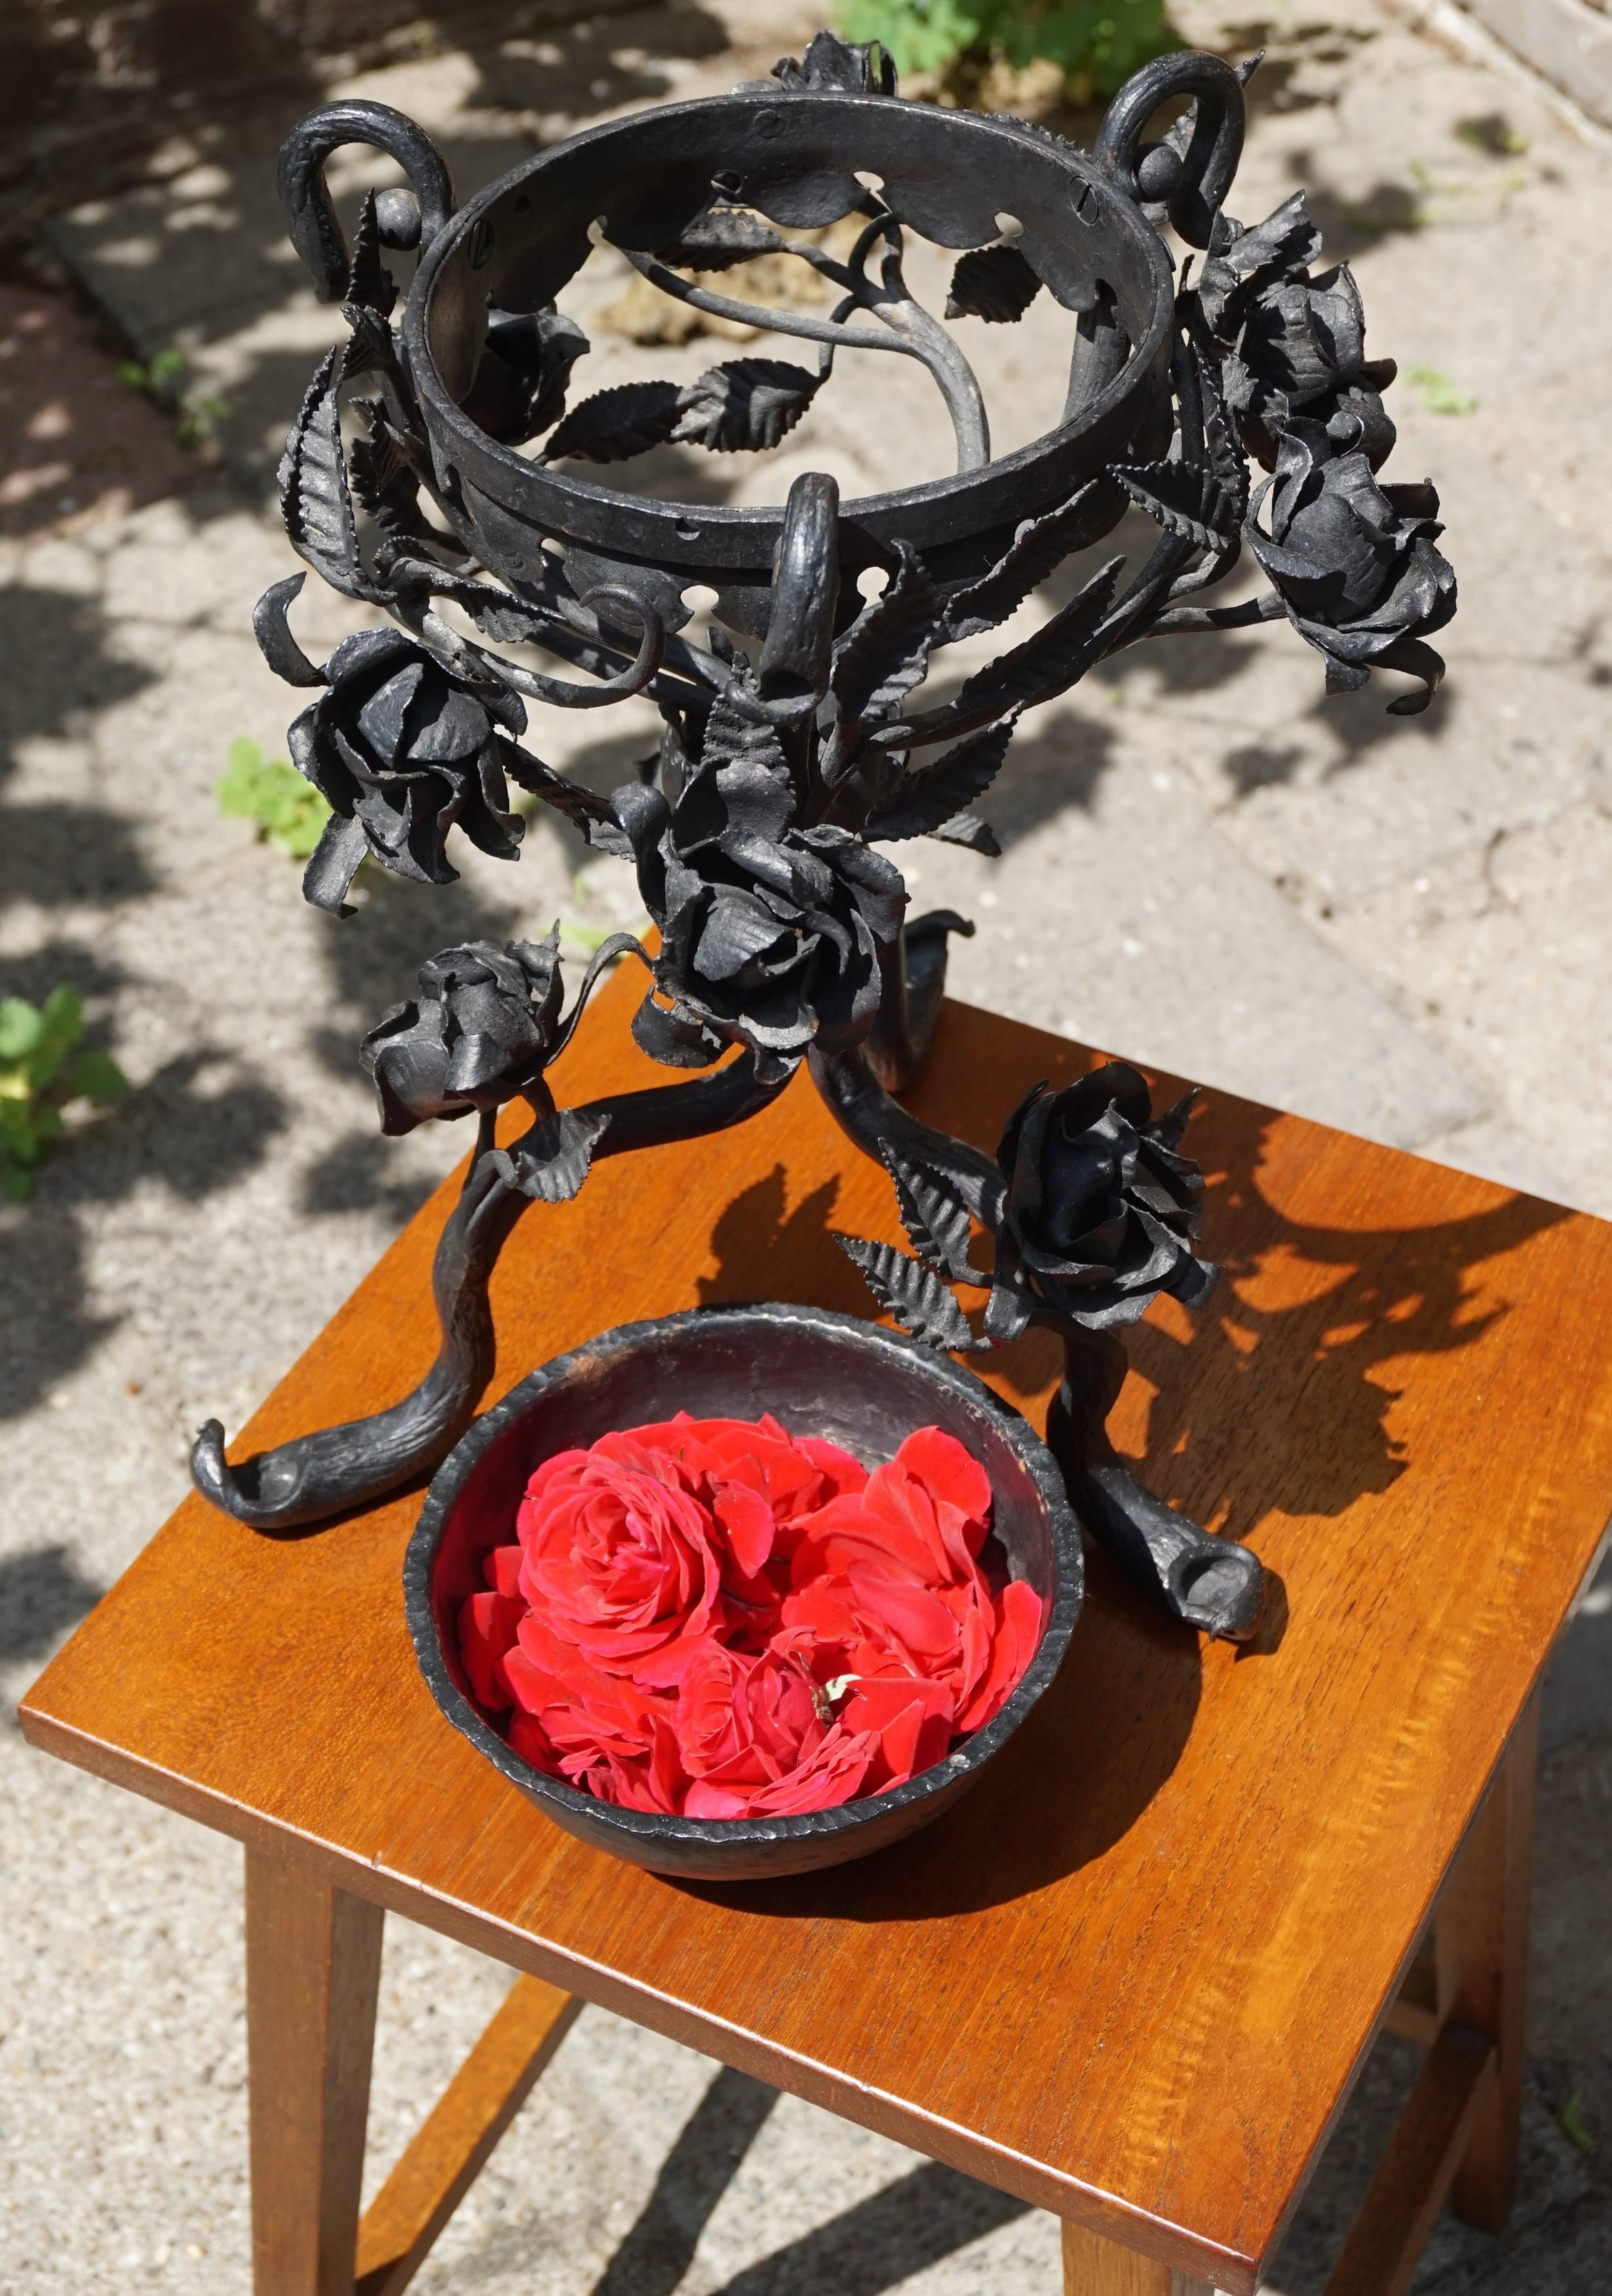 European Early 1900 Wrought Iron Arts & Crafts Potpourri Holder 'The Rose Bowl' Planter For Sale